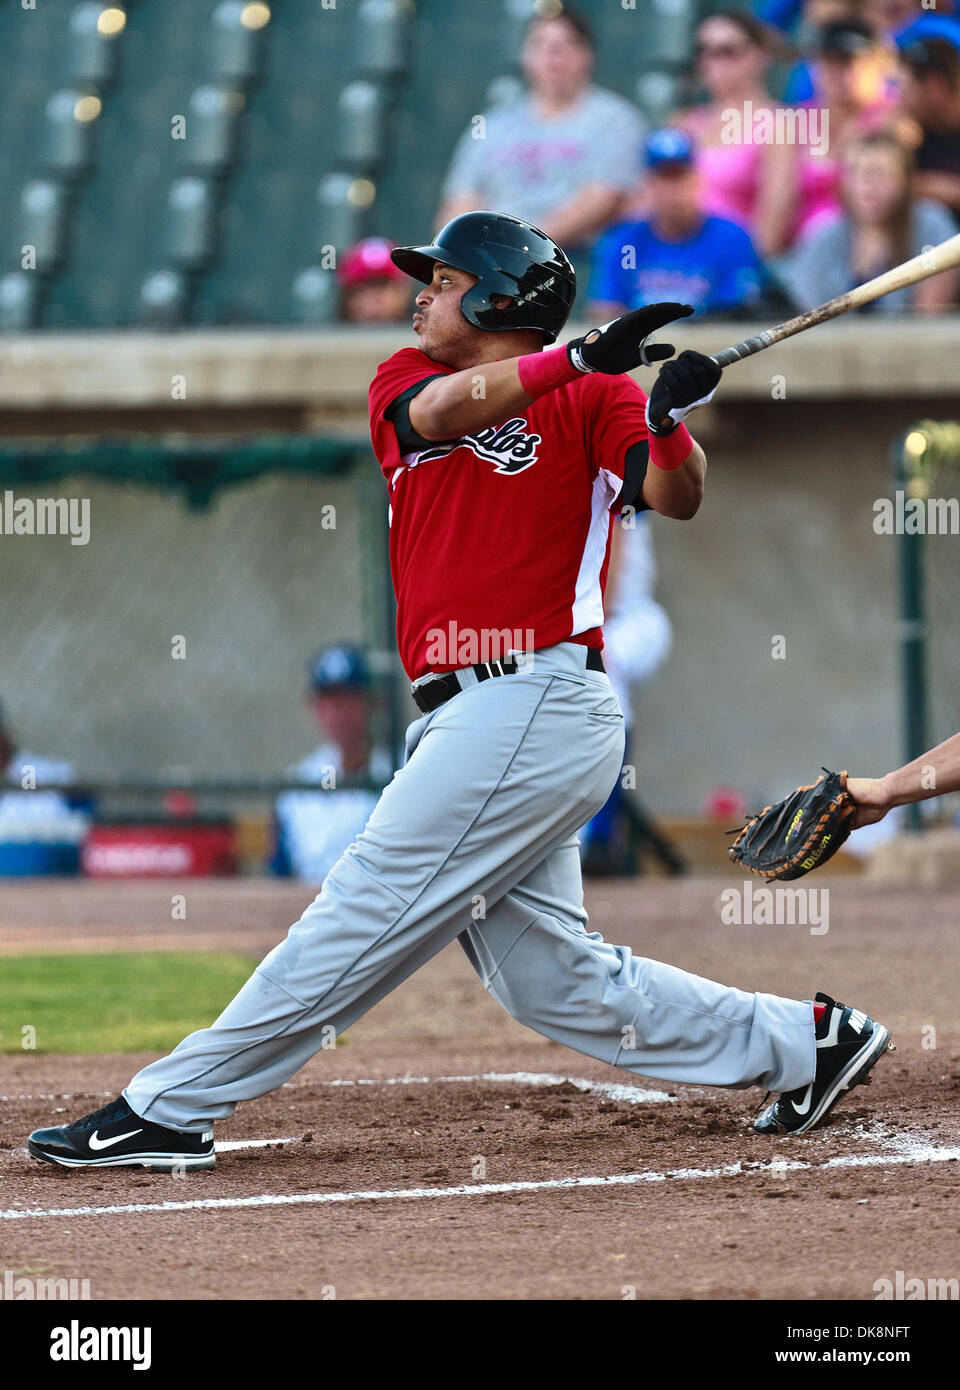 July 28, 2011 - Fort Worth, Texas, U.S - El Paso Diablos 1st Baseman Javier Brito (26) in action during the American Association of Independant Professional Baseball game between the El Paso Diablos and the Fort Worth Cats at the historic LaGrave Baseball Field in Fort Worth, Tx. Fort Worth defeats El Paso 10 to 9. (Credit Image: © Dan Wozniak/Southcreek Global/ZUMAPRESS.com) Stock Photo